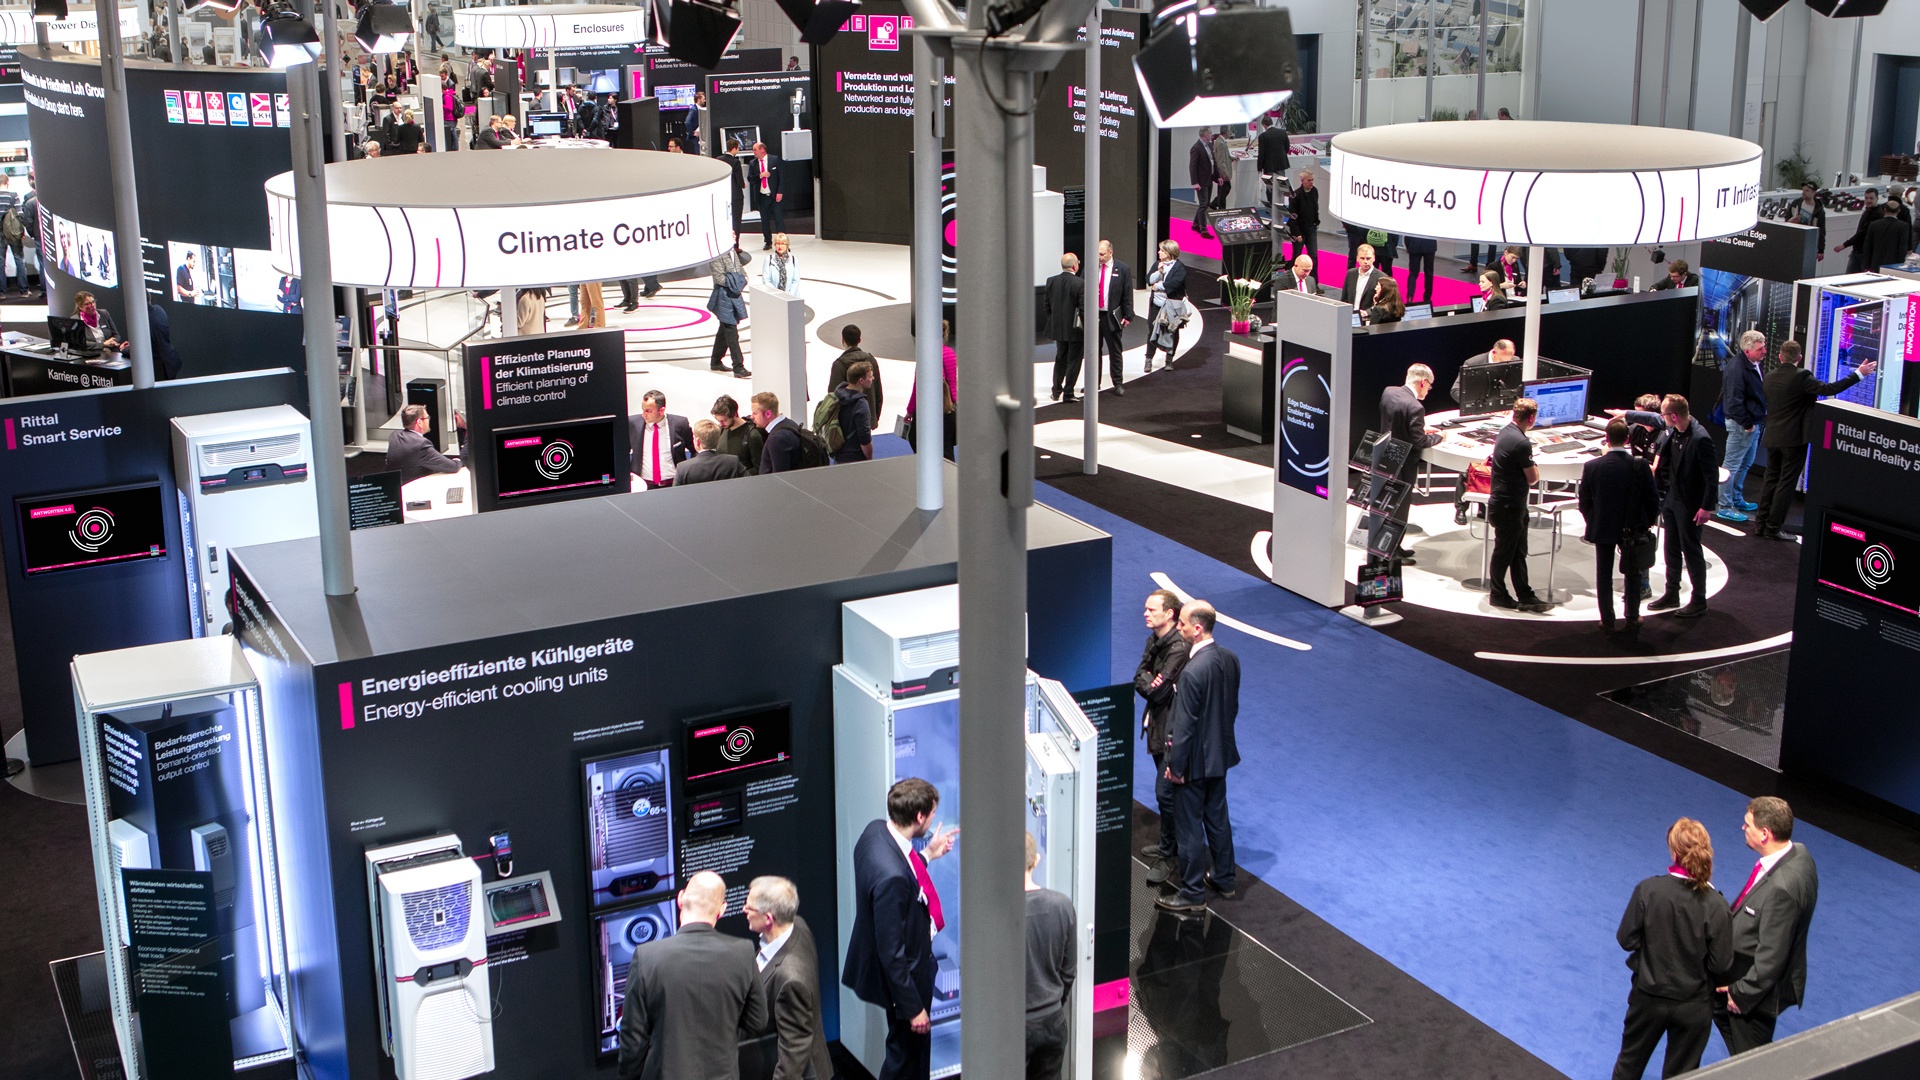 Hannover Messe 2019 – Rittal